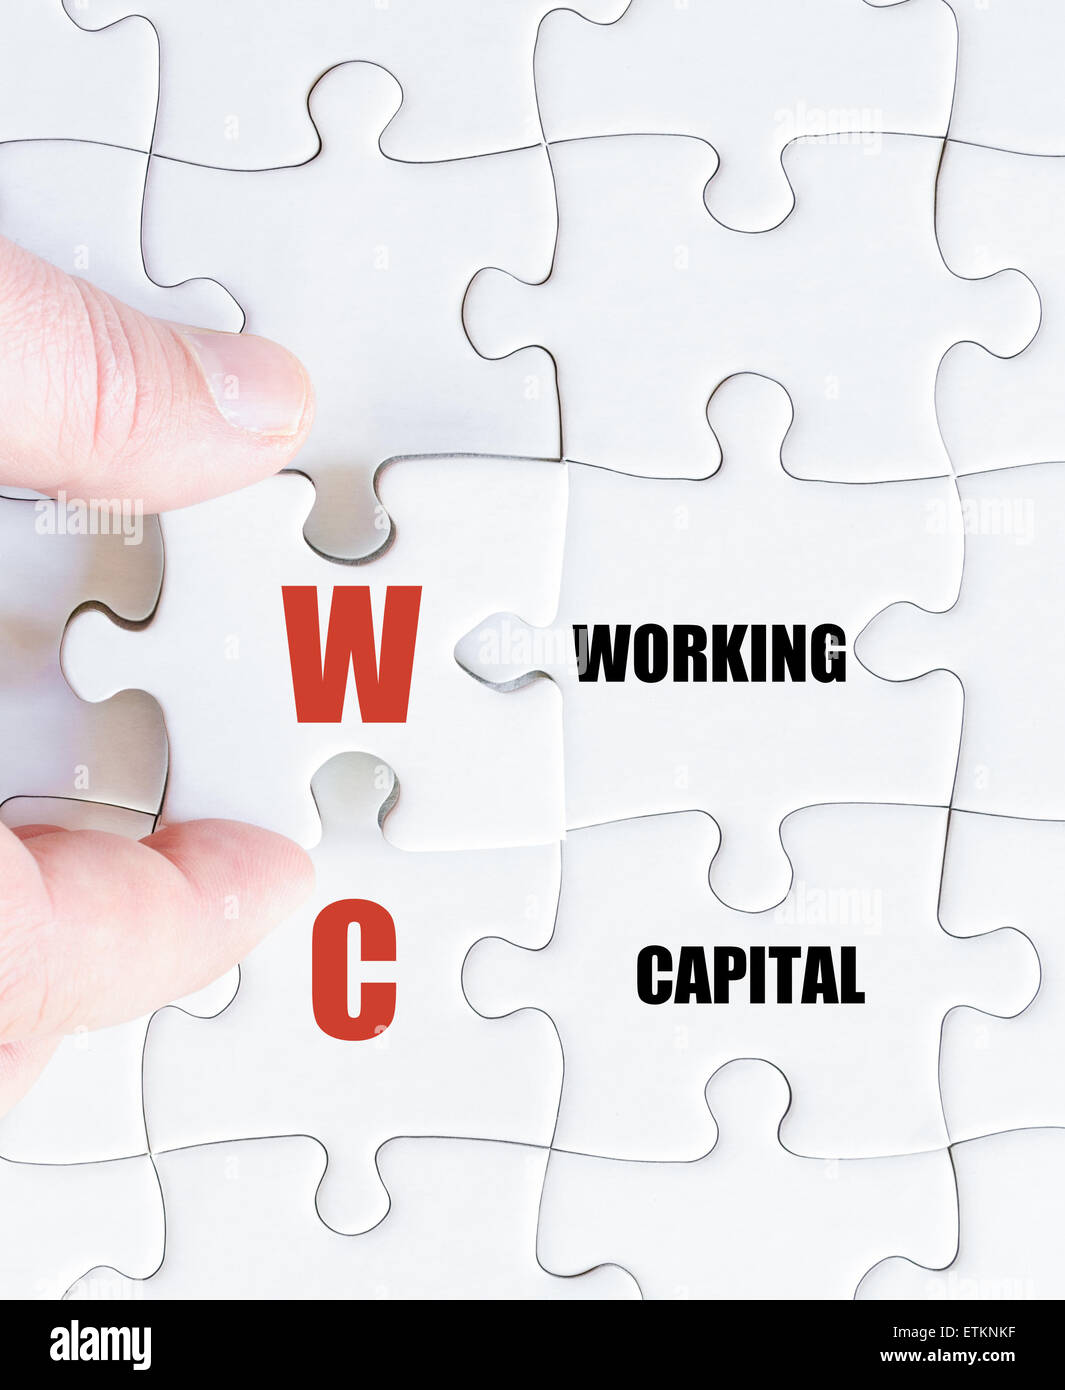 Hand of a business man completing the puzzle with the last missing piece.Concept image of Business Acronym WC as Working Capital Stock Photo